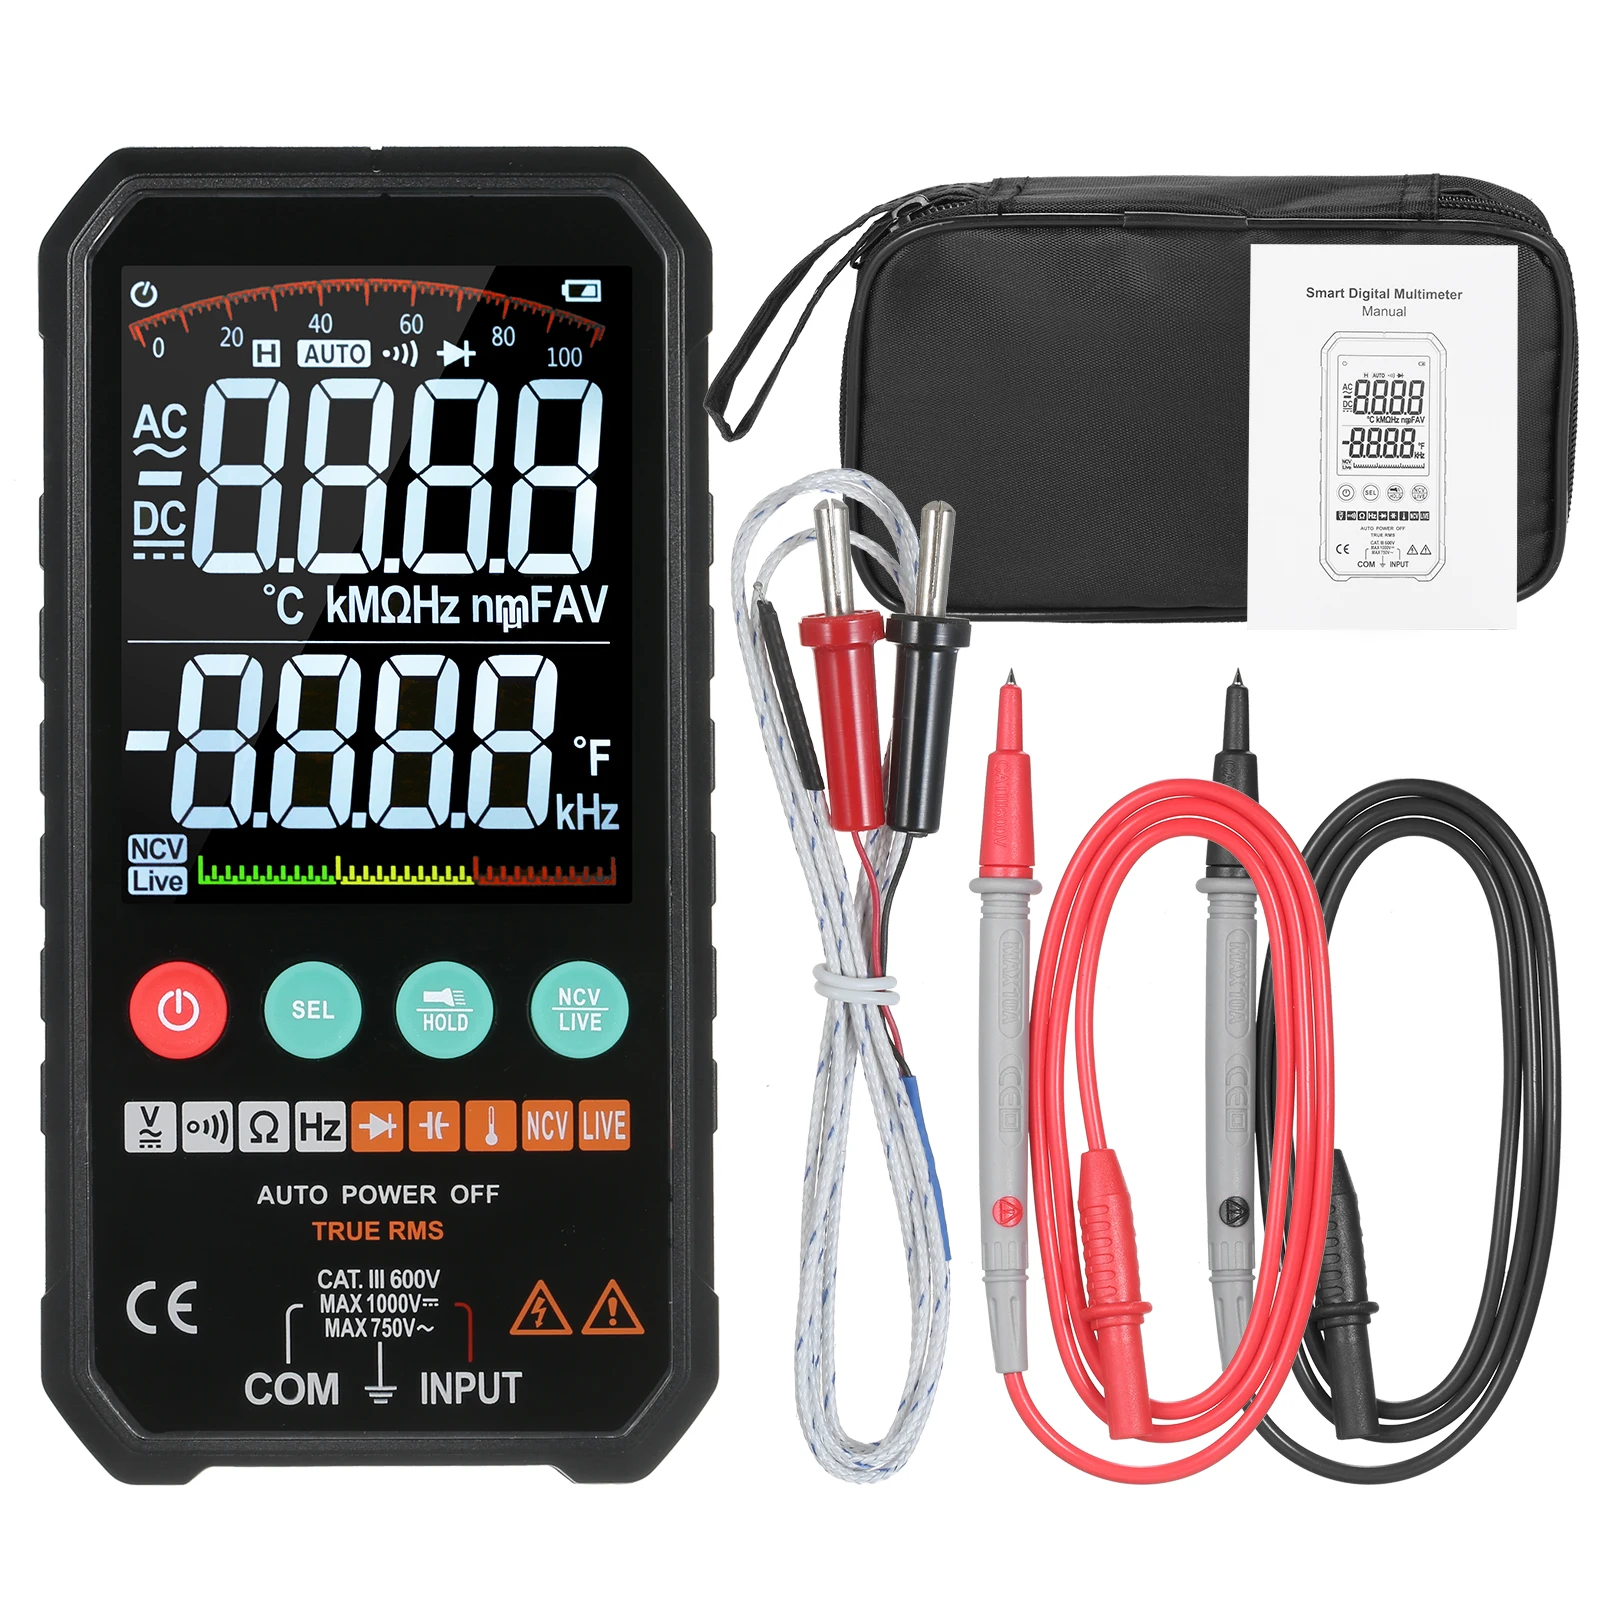 

LCD Digital Multimeter 6000 Counts True RMS AC/DC Voltage Resistance Capacitance Frequency Continuity Diode NCV Test